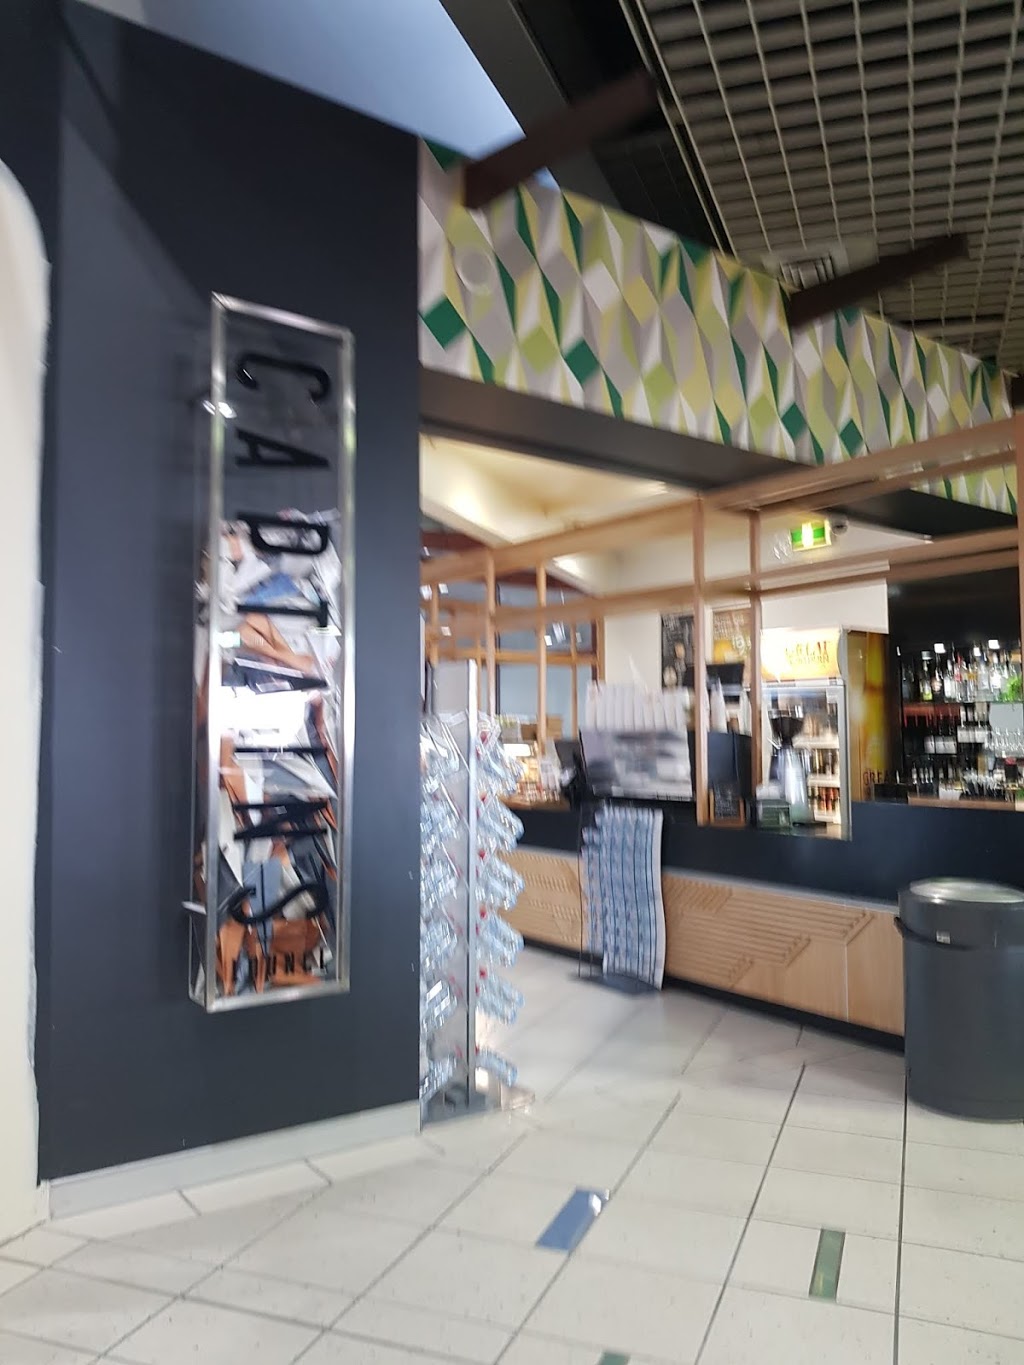 The Captains Lounge | cafe | Townsville Airport Garbutt QLD 4814, Townsville Airport, Garbutt QLD 4814, Australia